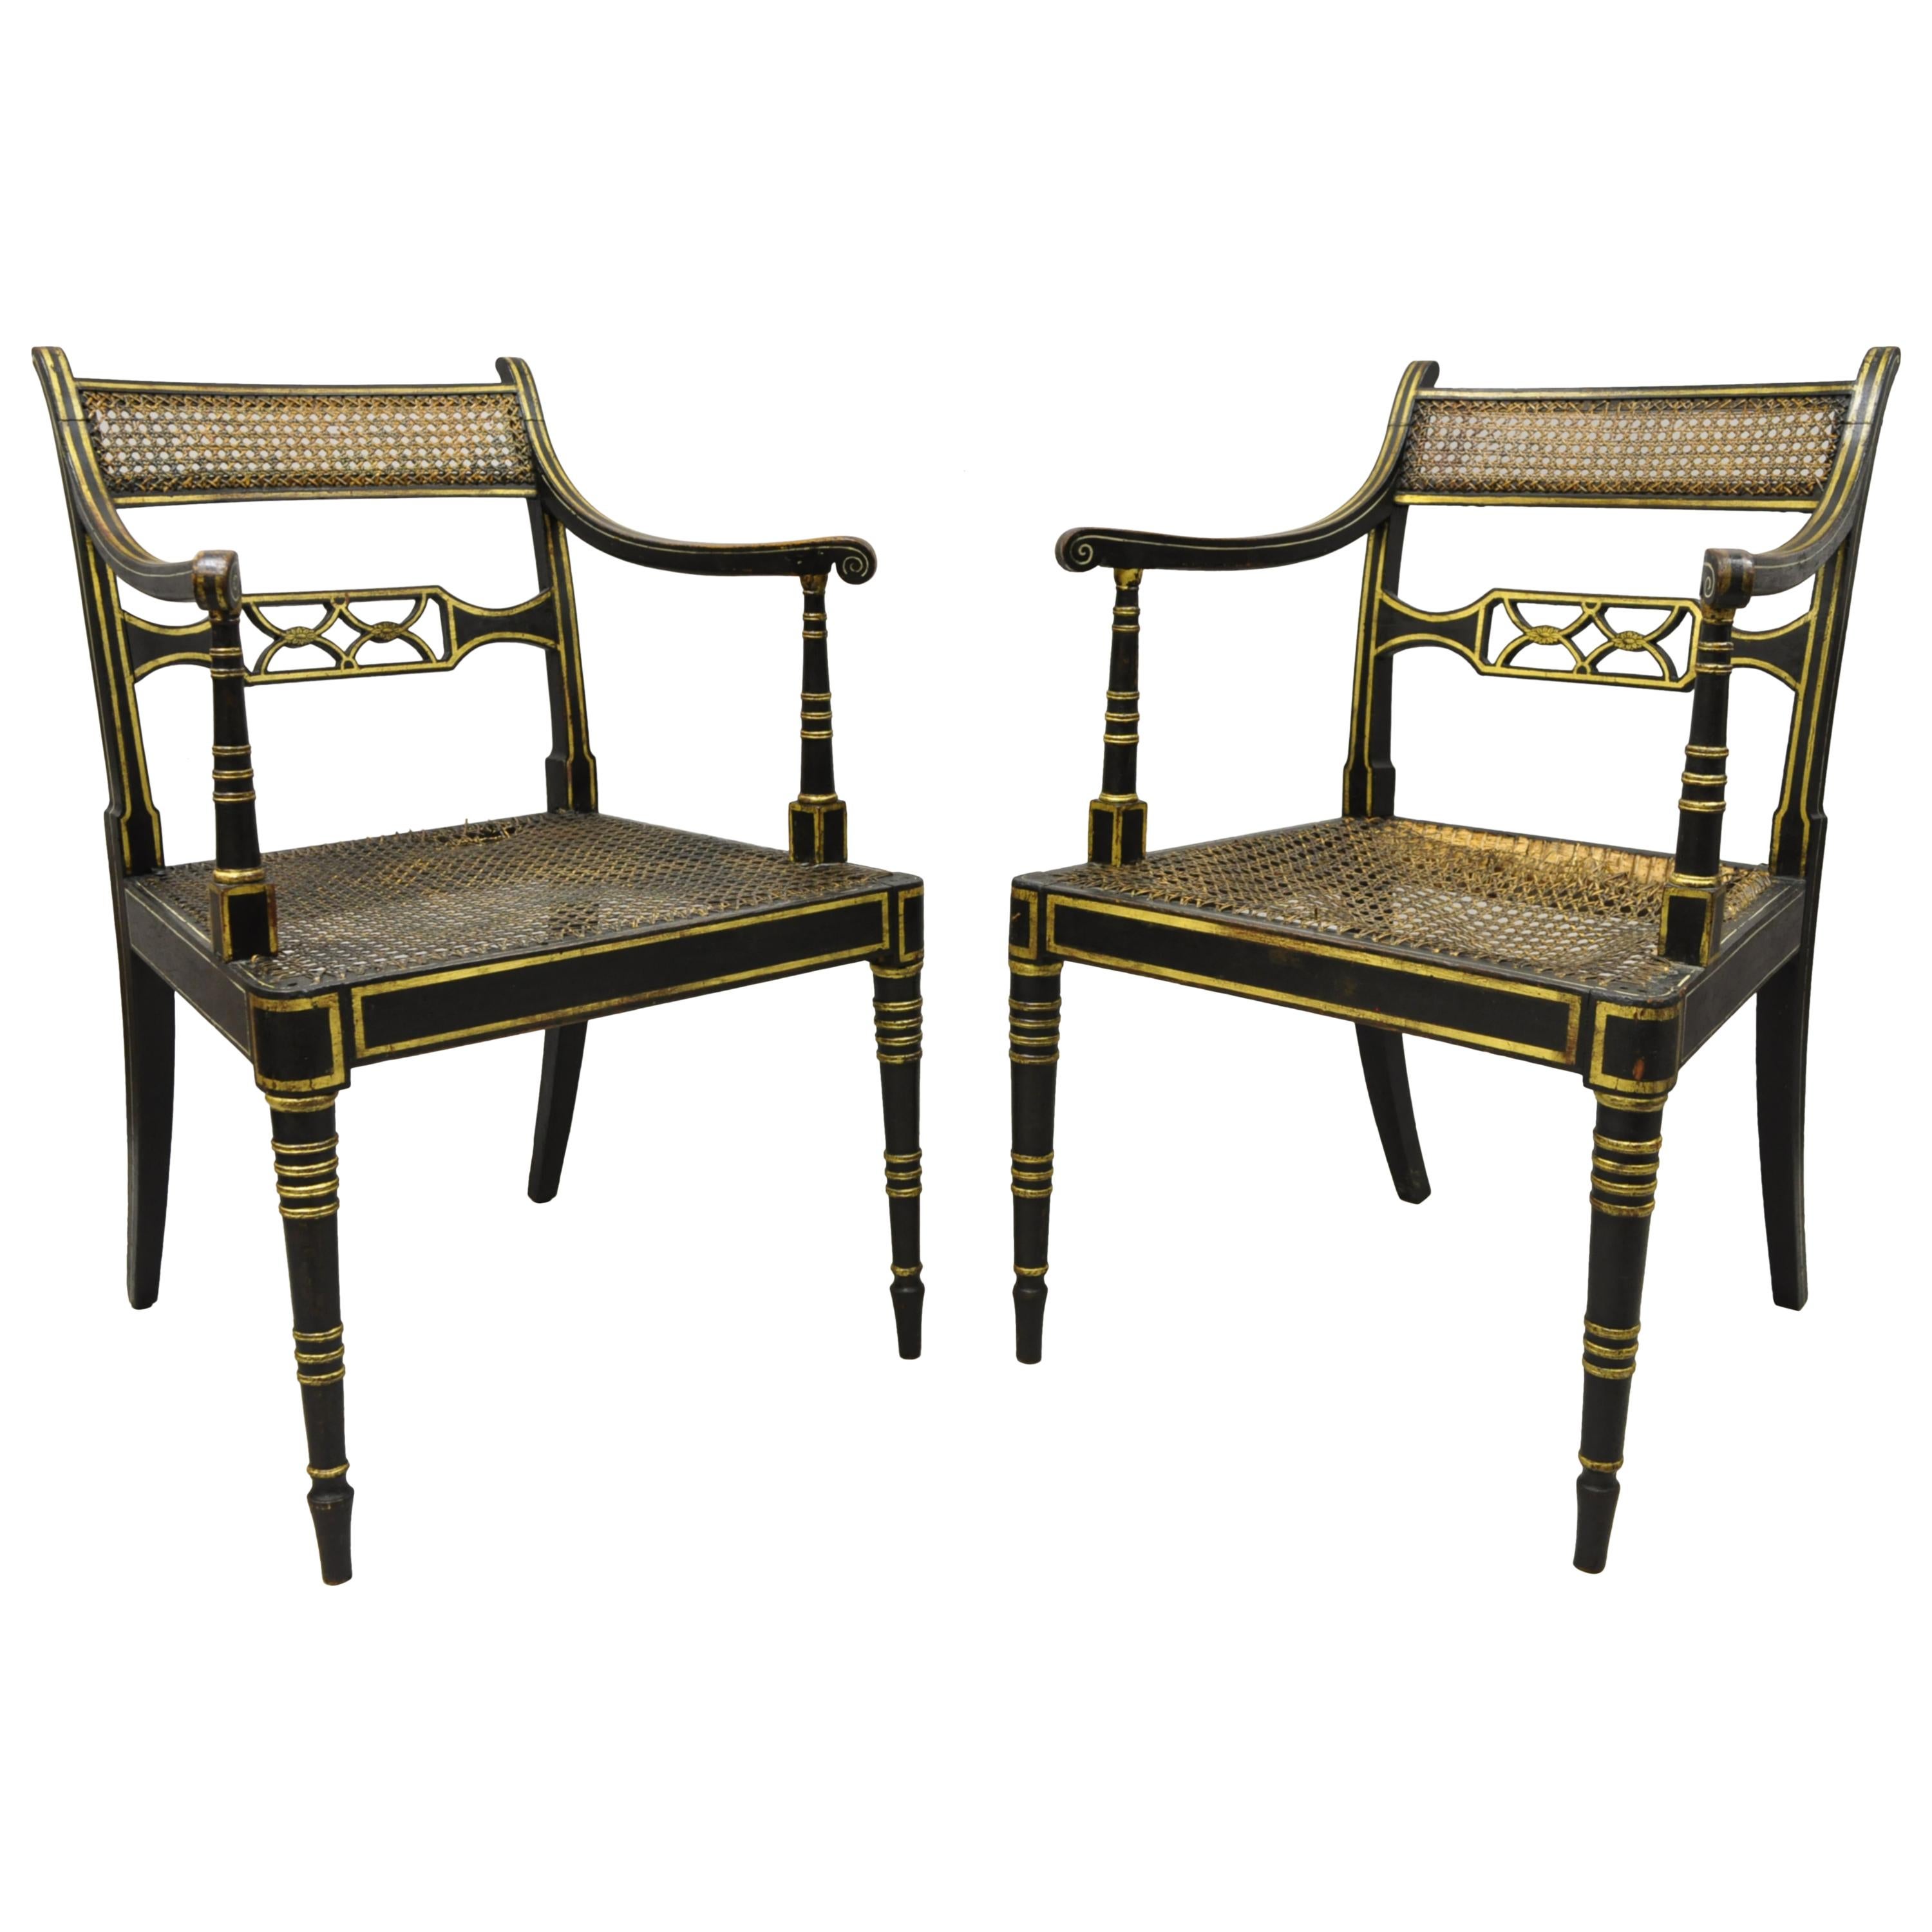 Antique English Regency Black and Gold Ebonized Cane Armchairs, a Pair